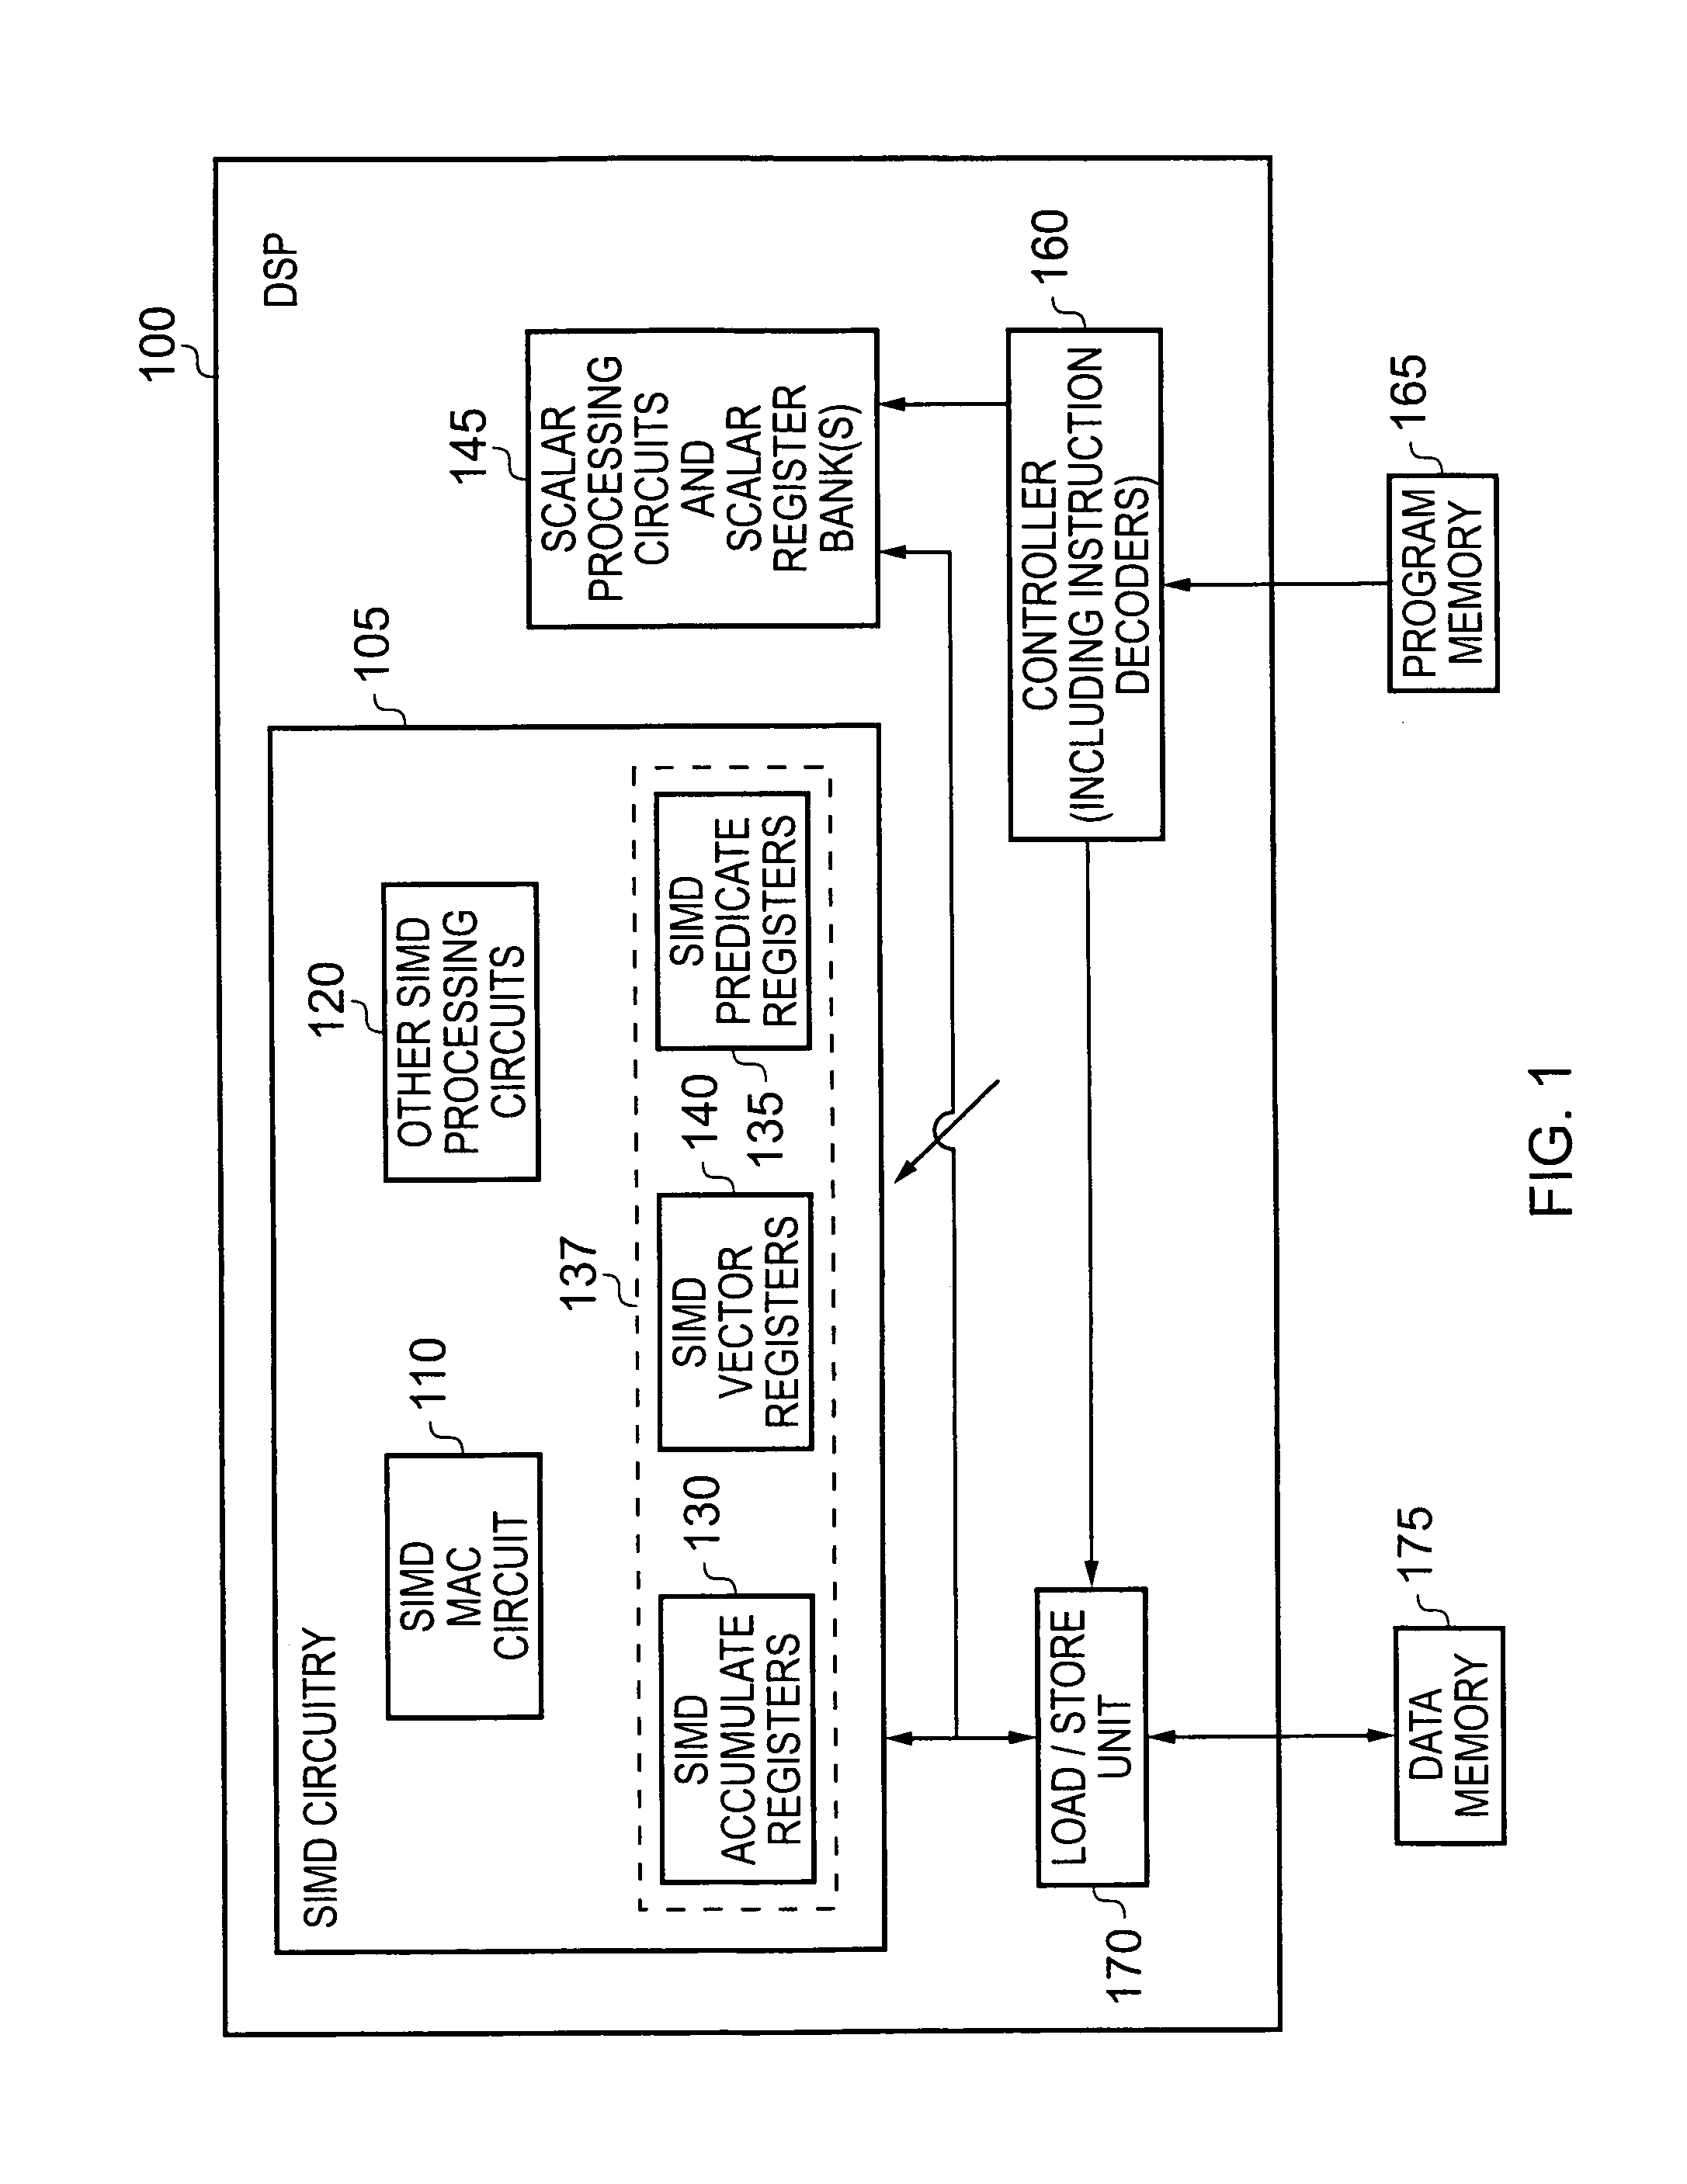 Apparatus and method for performing multiply-accumulate operations